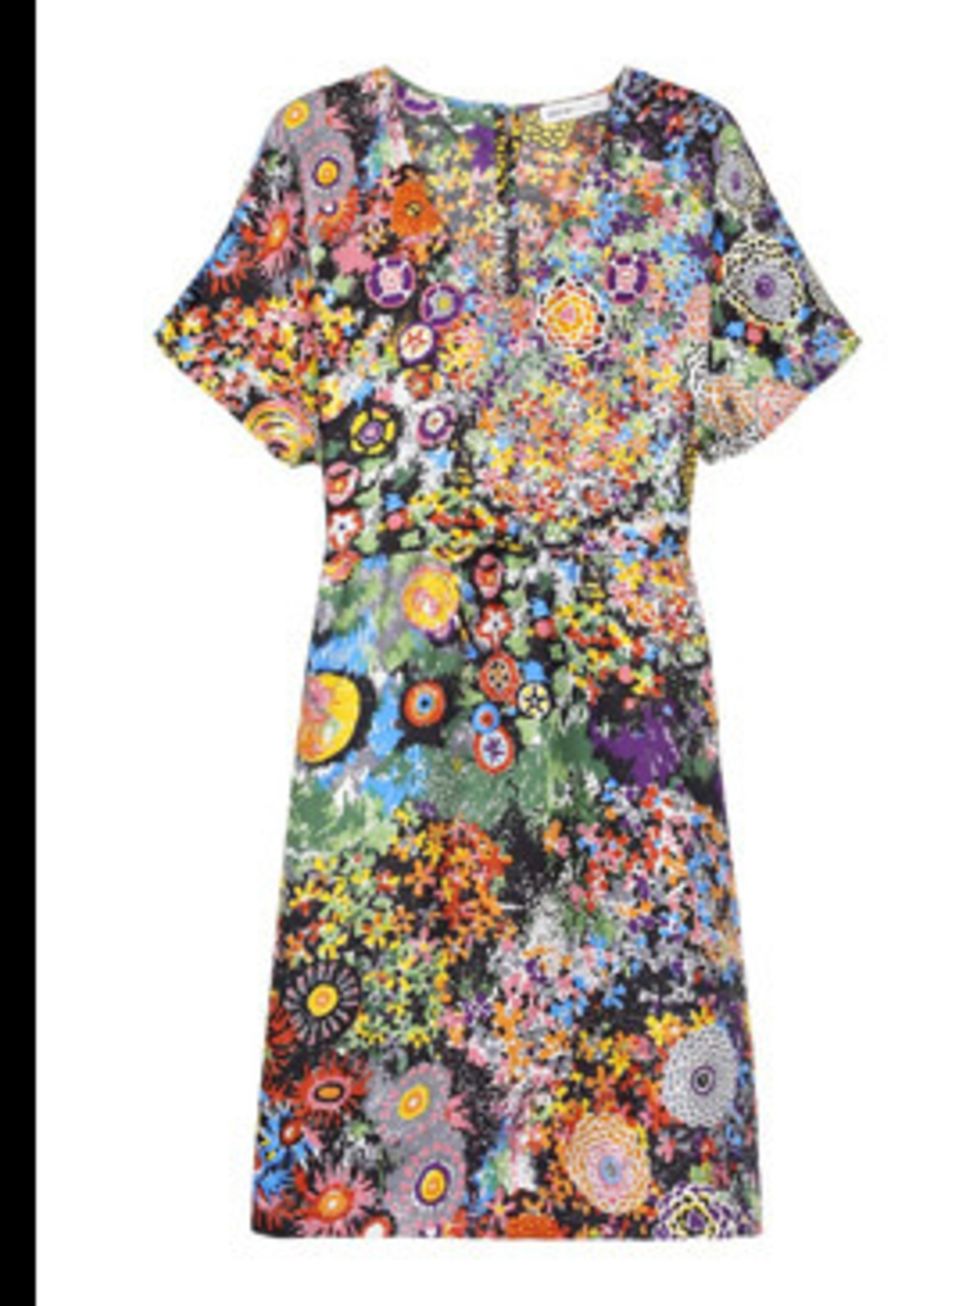 <p>Silk mini dress, £325, by See By Chloe at <a href="http://www.net-a-porter.com/product/41013">www.net-a-porter.com</a></p>